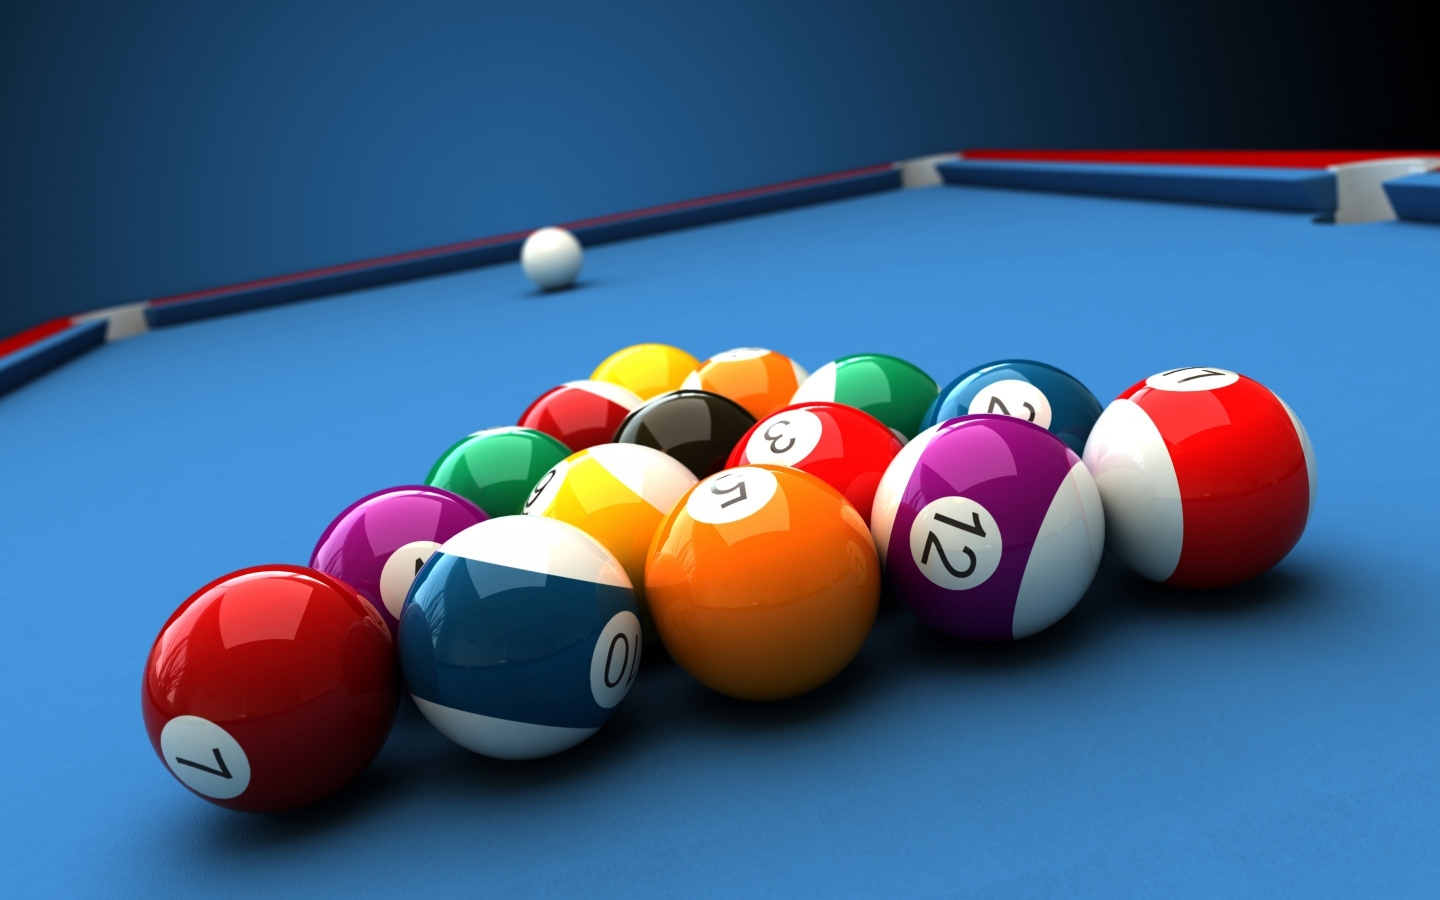 Billiards Table and Balls for 1440 x 900 widescreen resolution